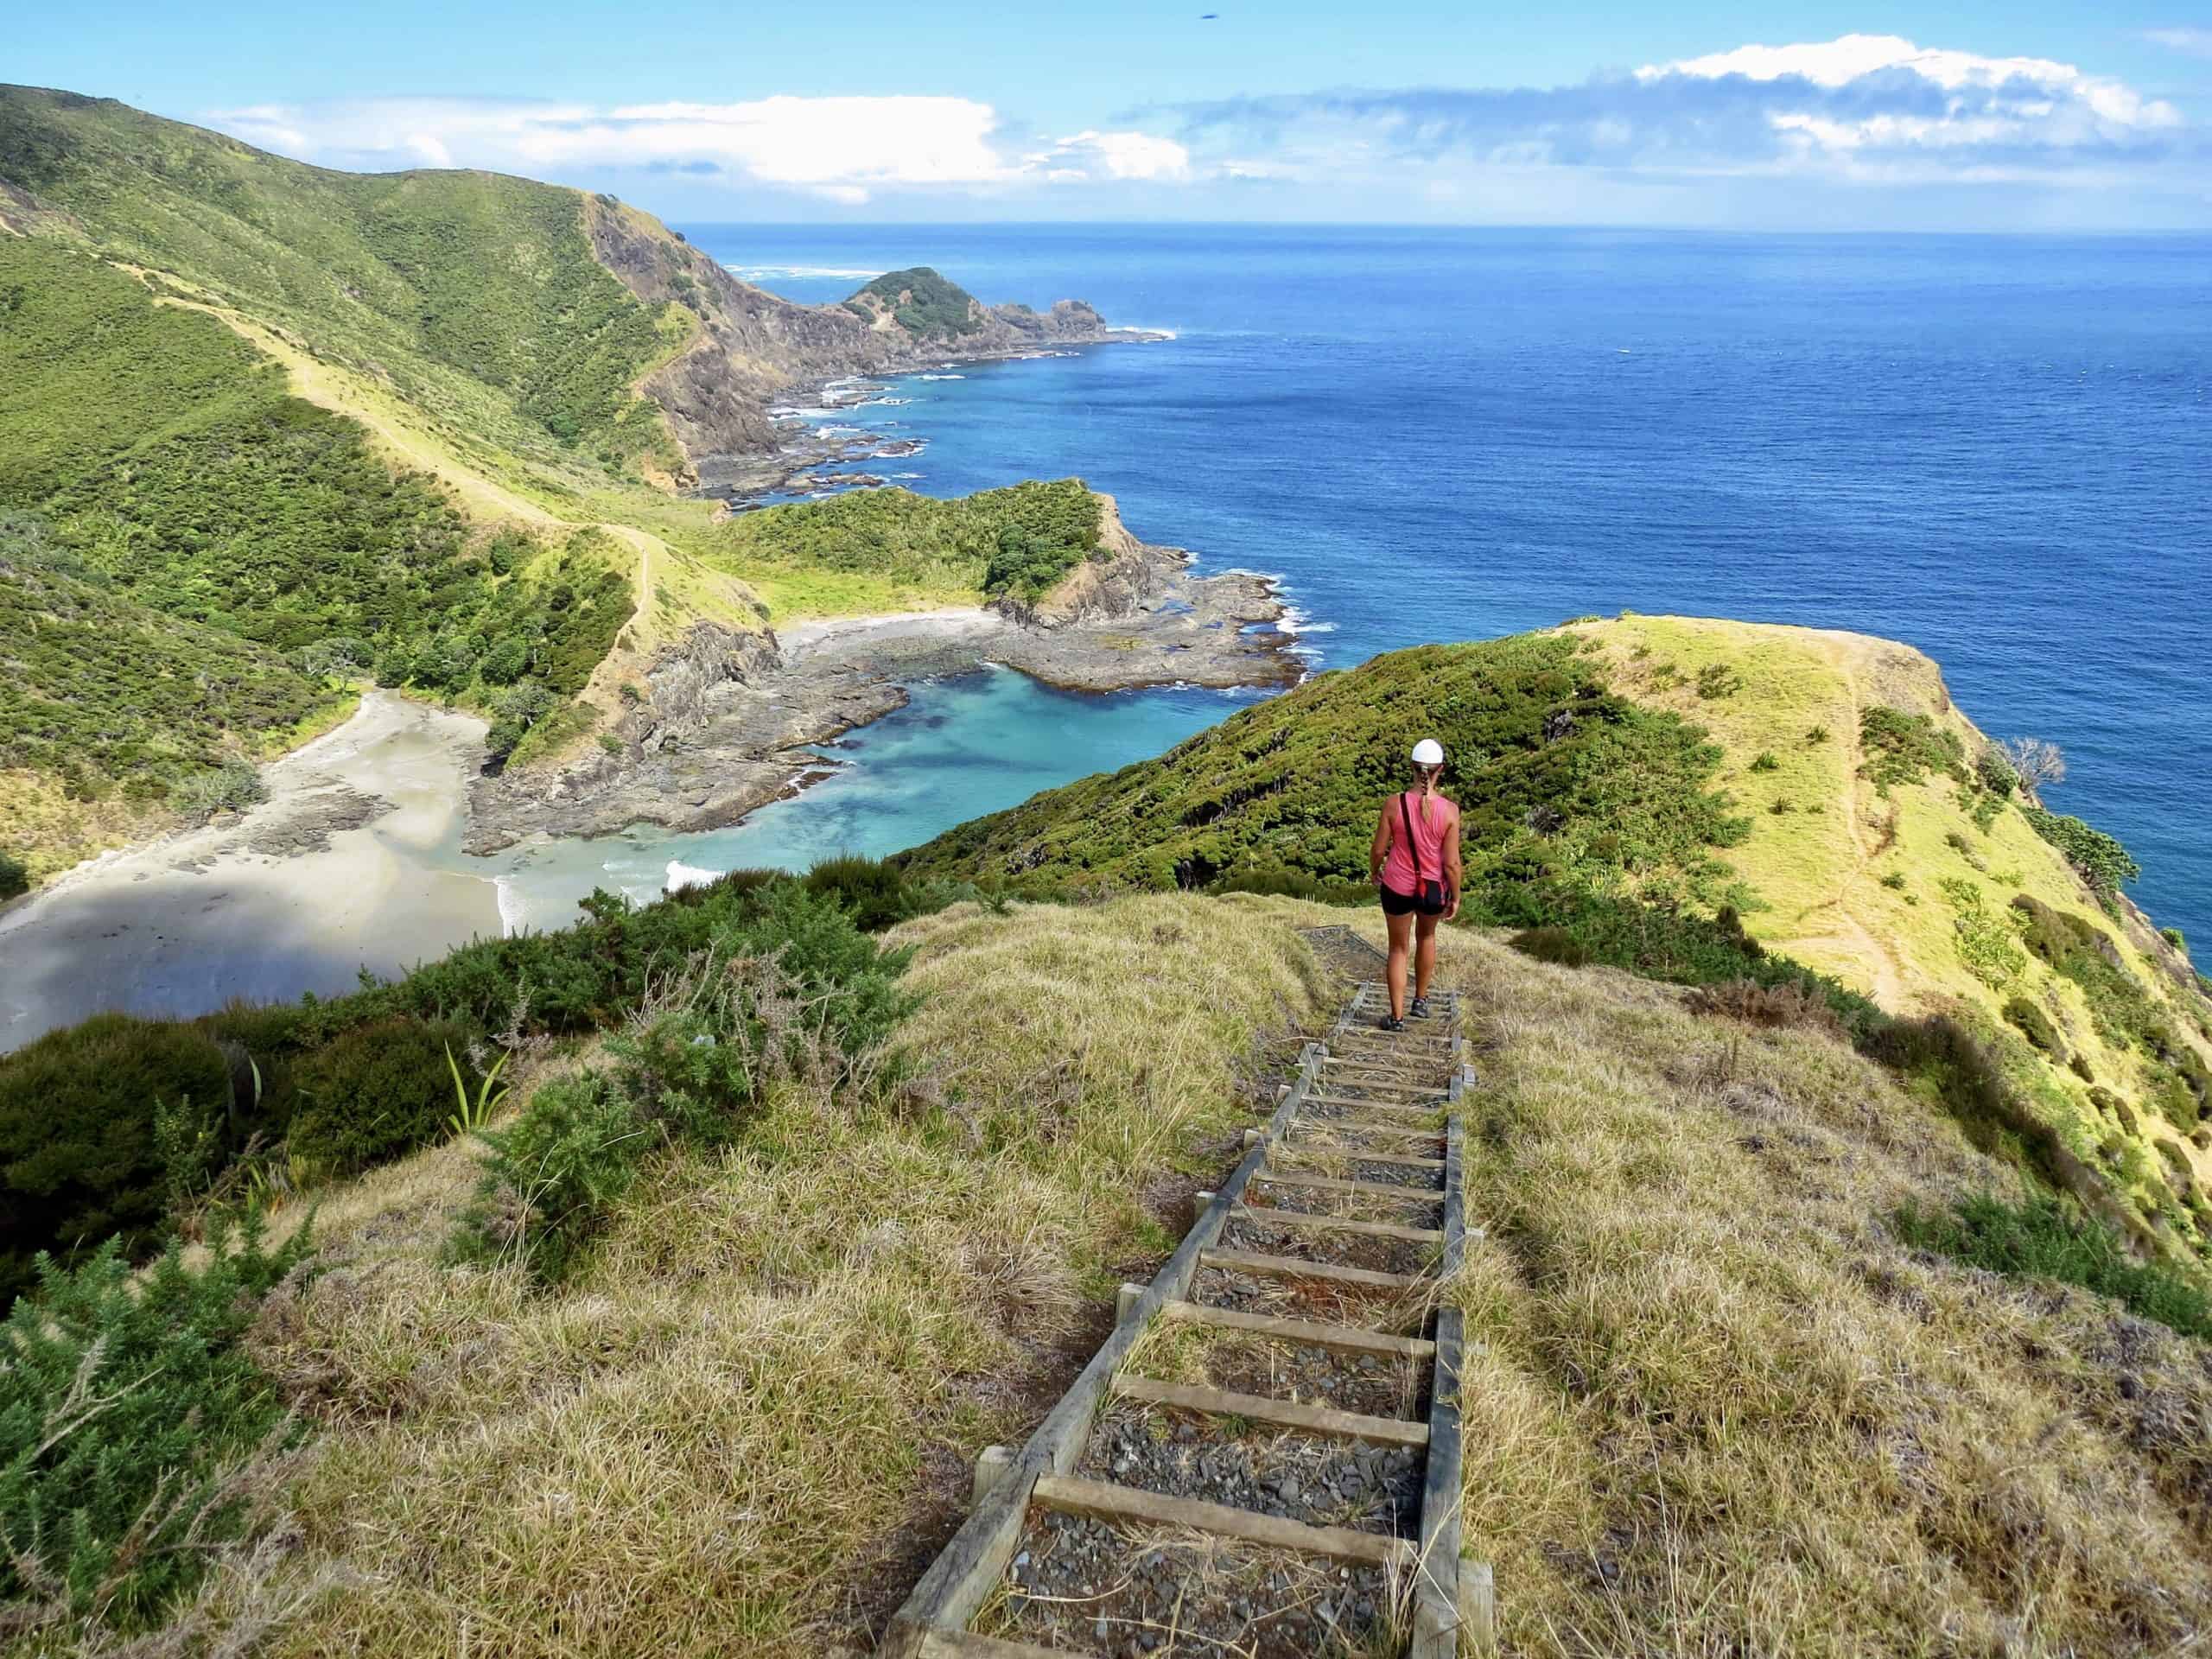 Incredible coastal day hike to Cape Reinga from Tapotupotu Bay